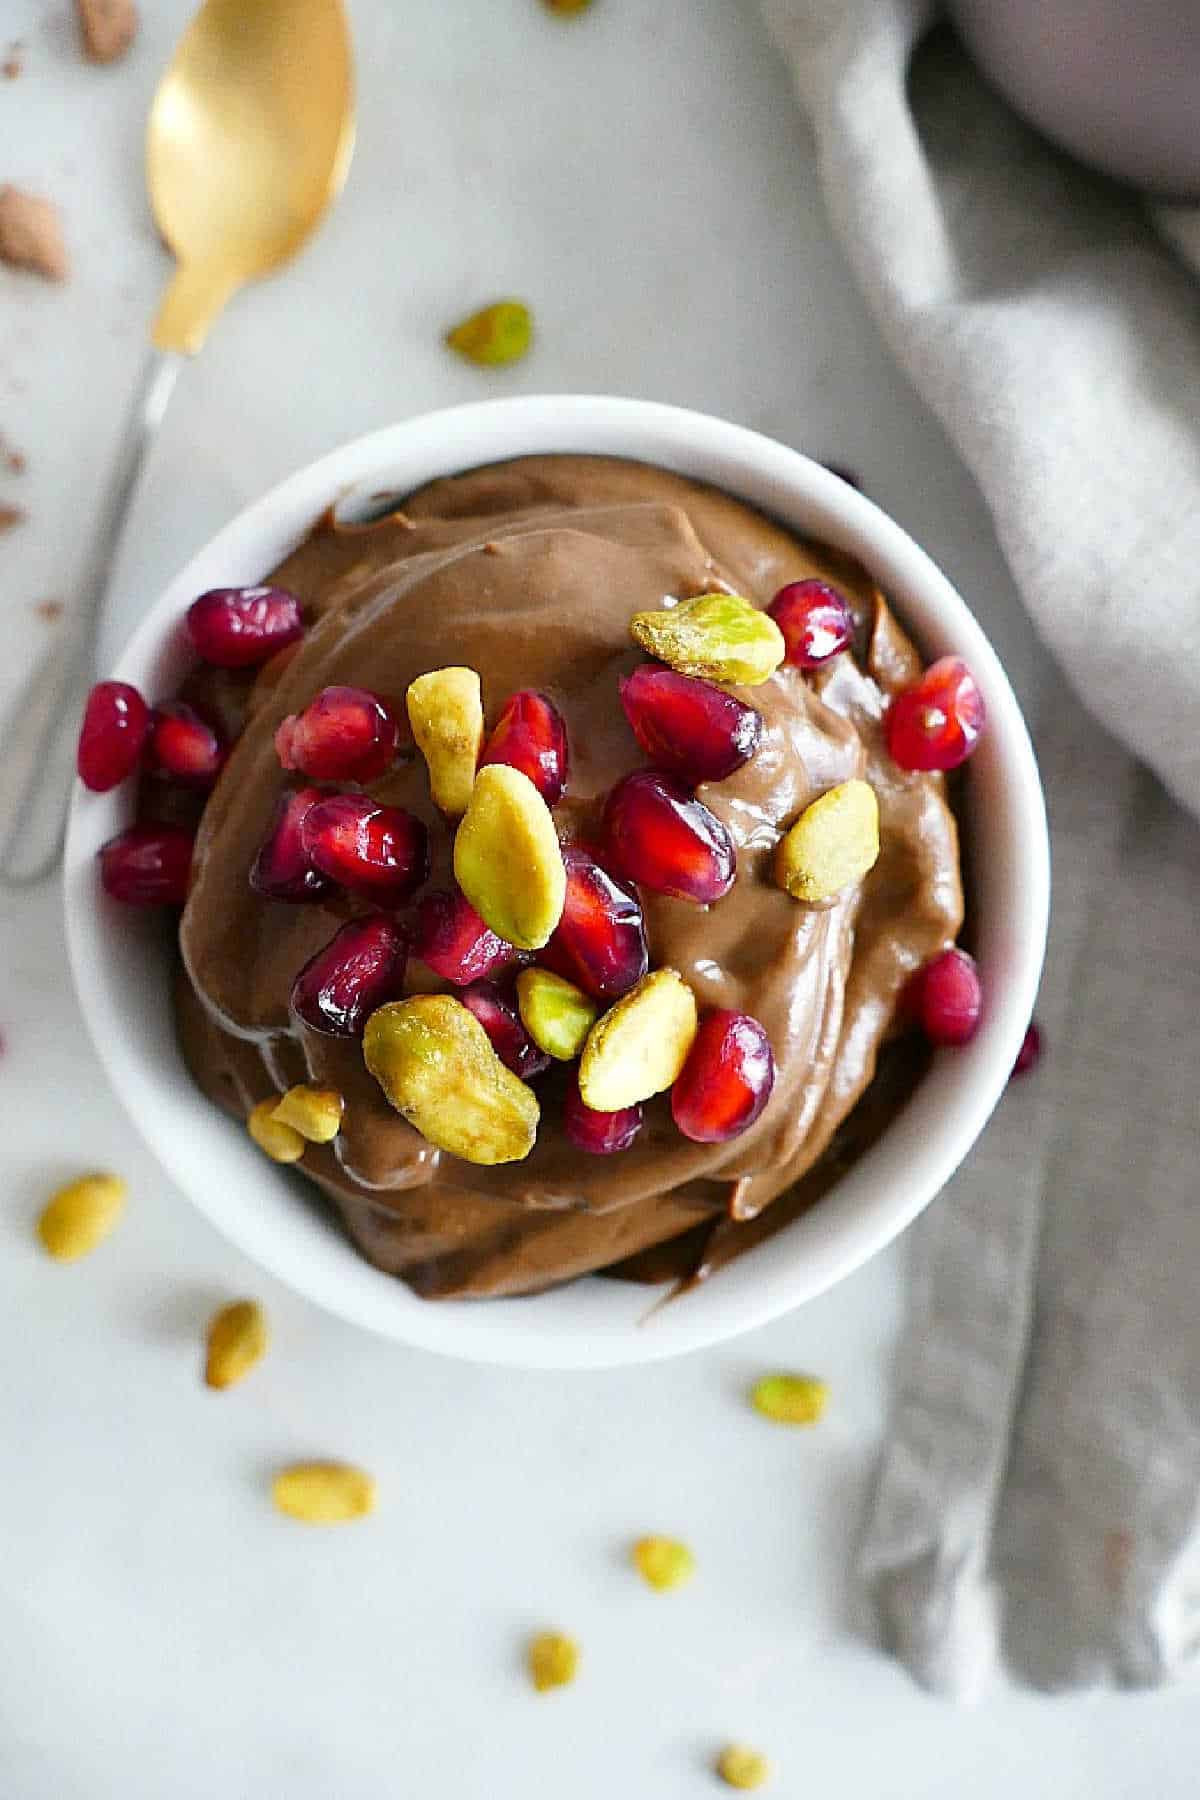 Vegan avocado chocolate mousse in a serving bowl with pistachios and pomegranate arils